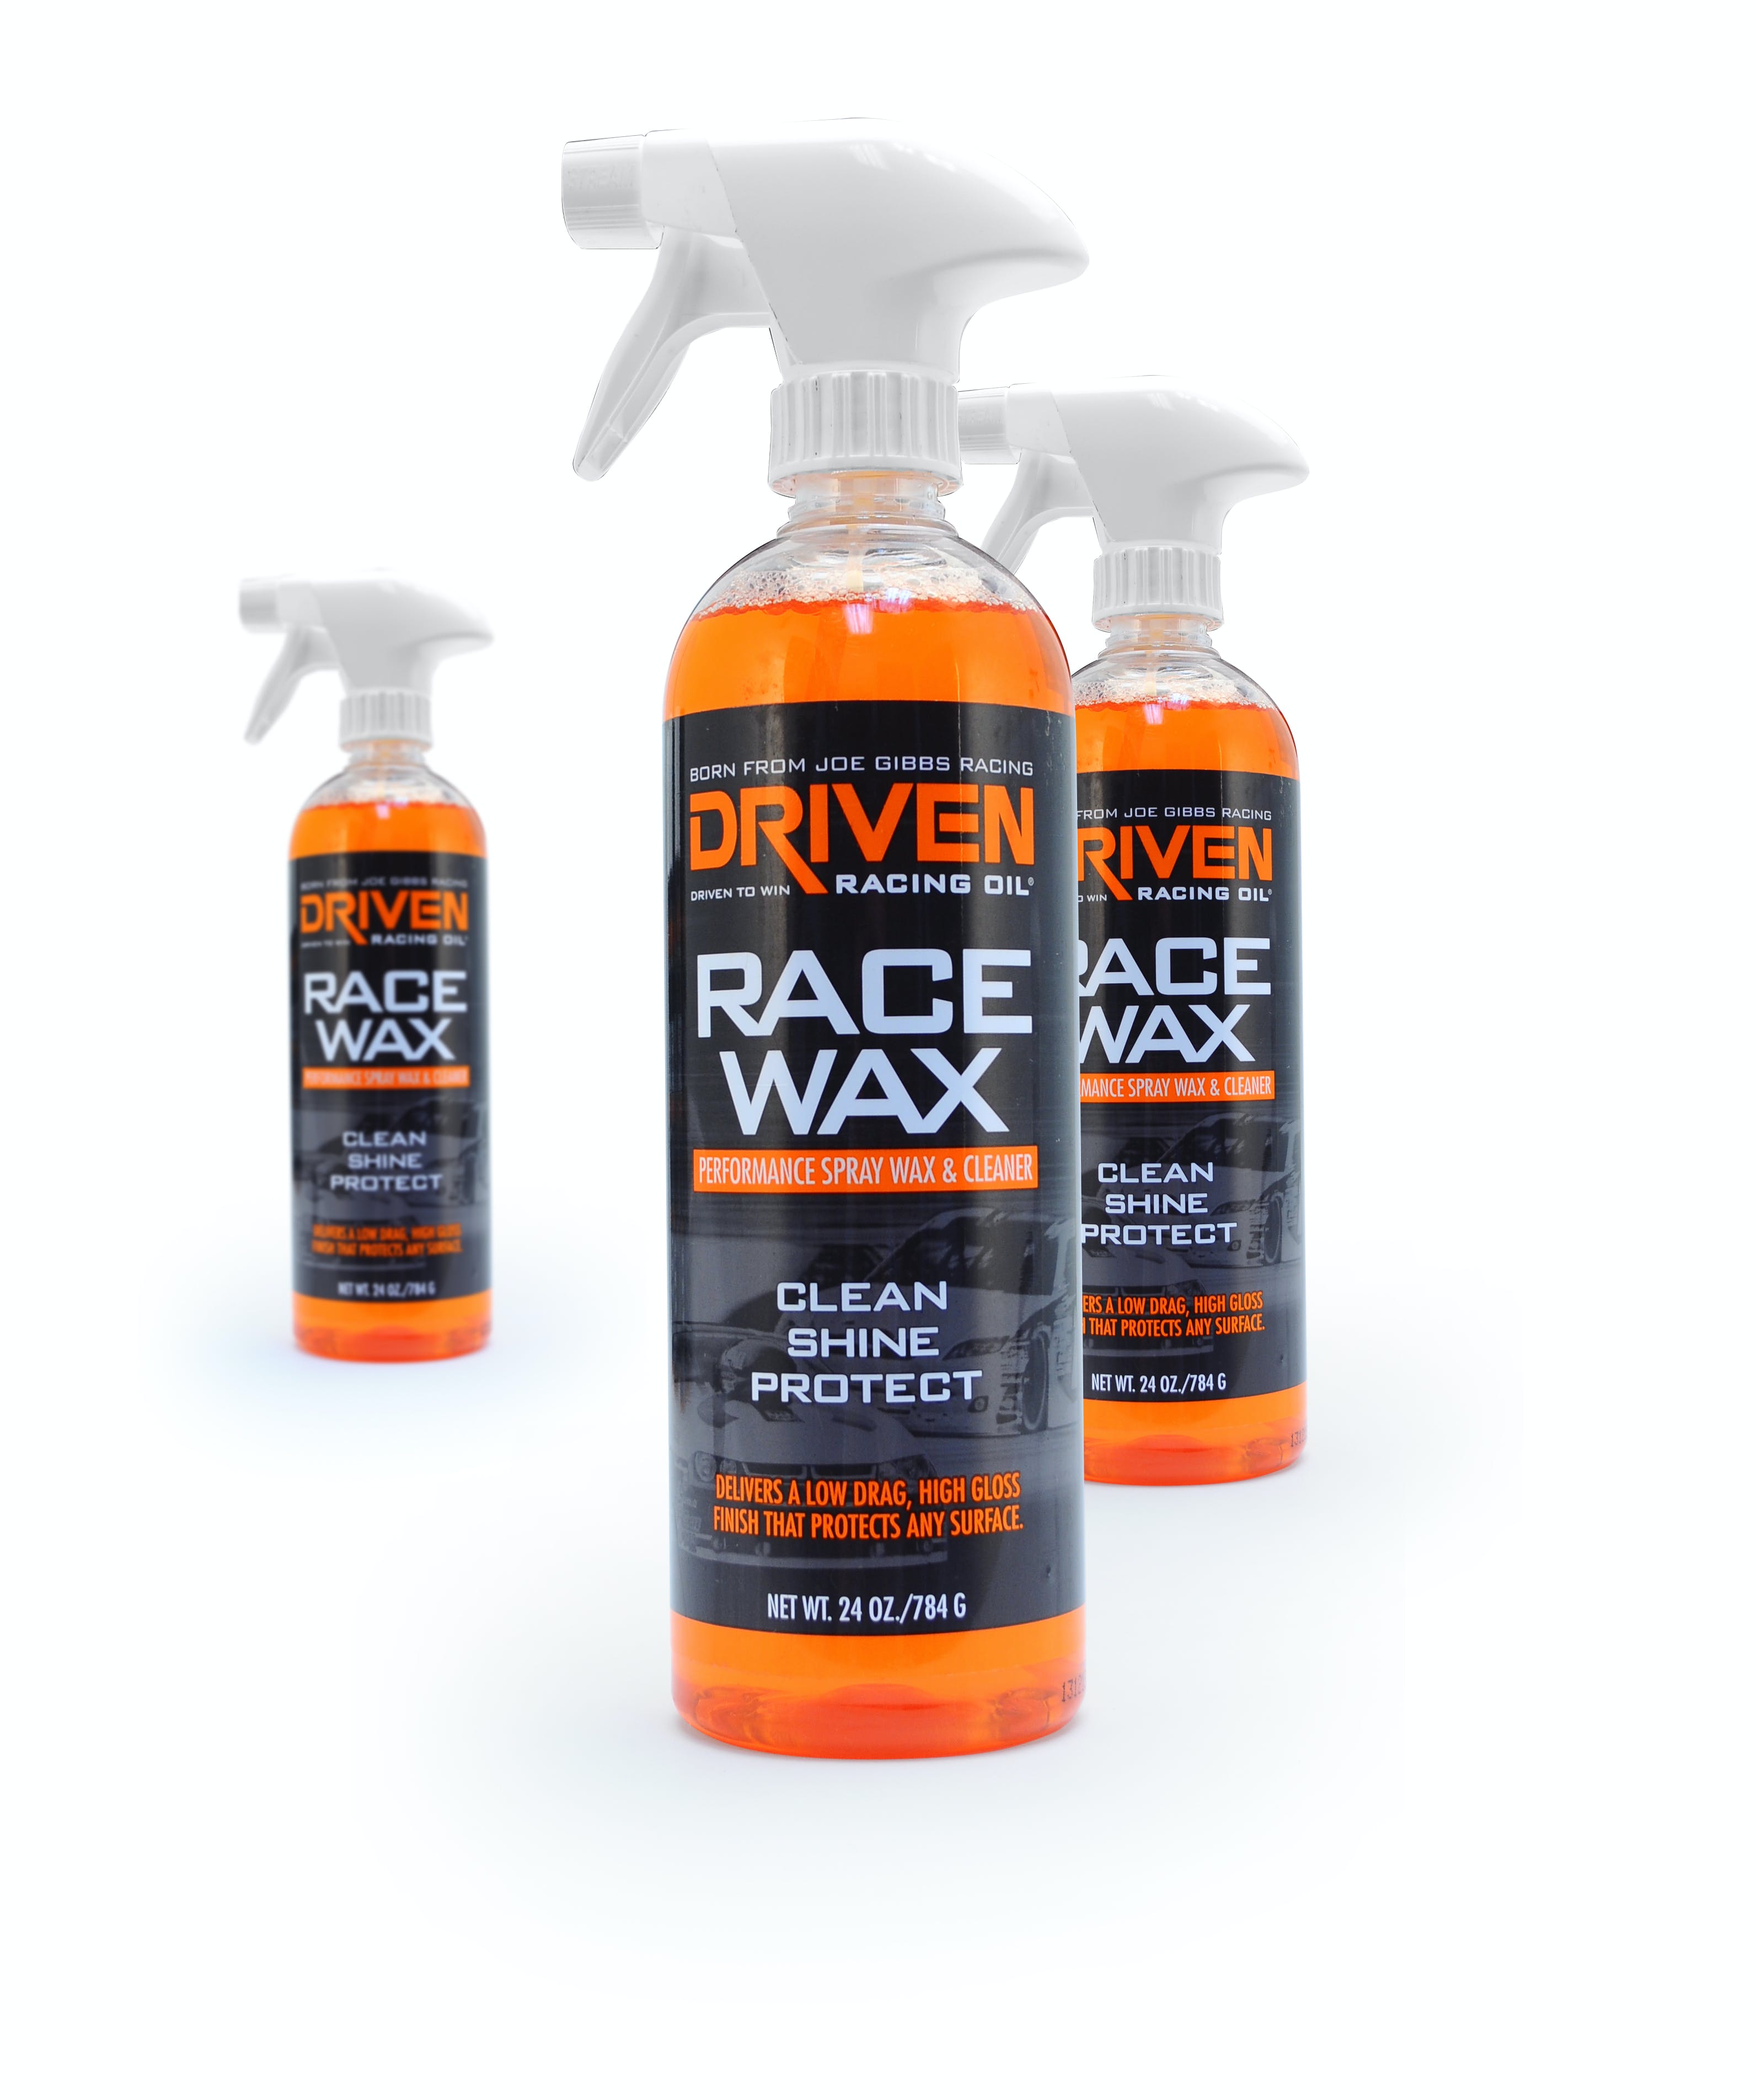 Driven Racing Oil 50060 Race Wax Performance Spray Wax and Cleaner (24 oz.)